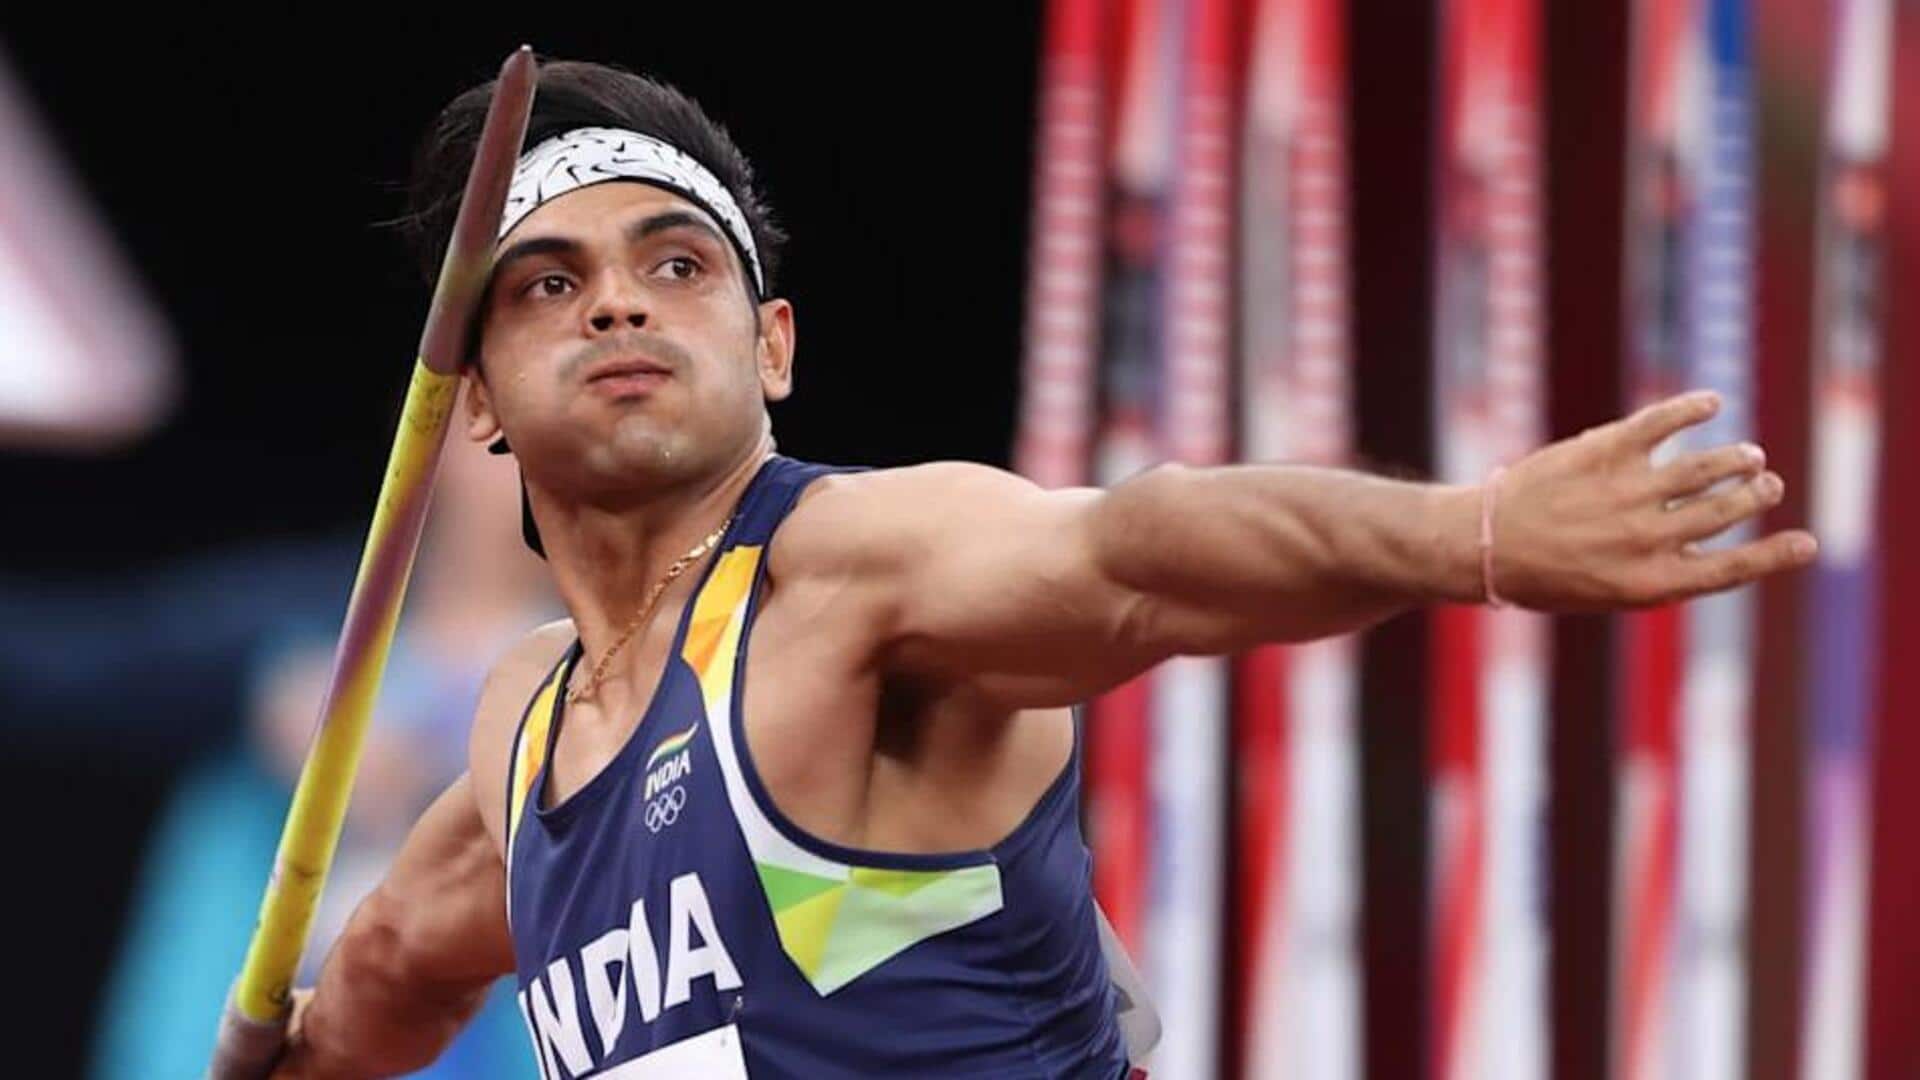 Javelin thrower Neeraj Chopra clinches his second Asian Games gold